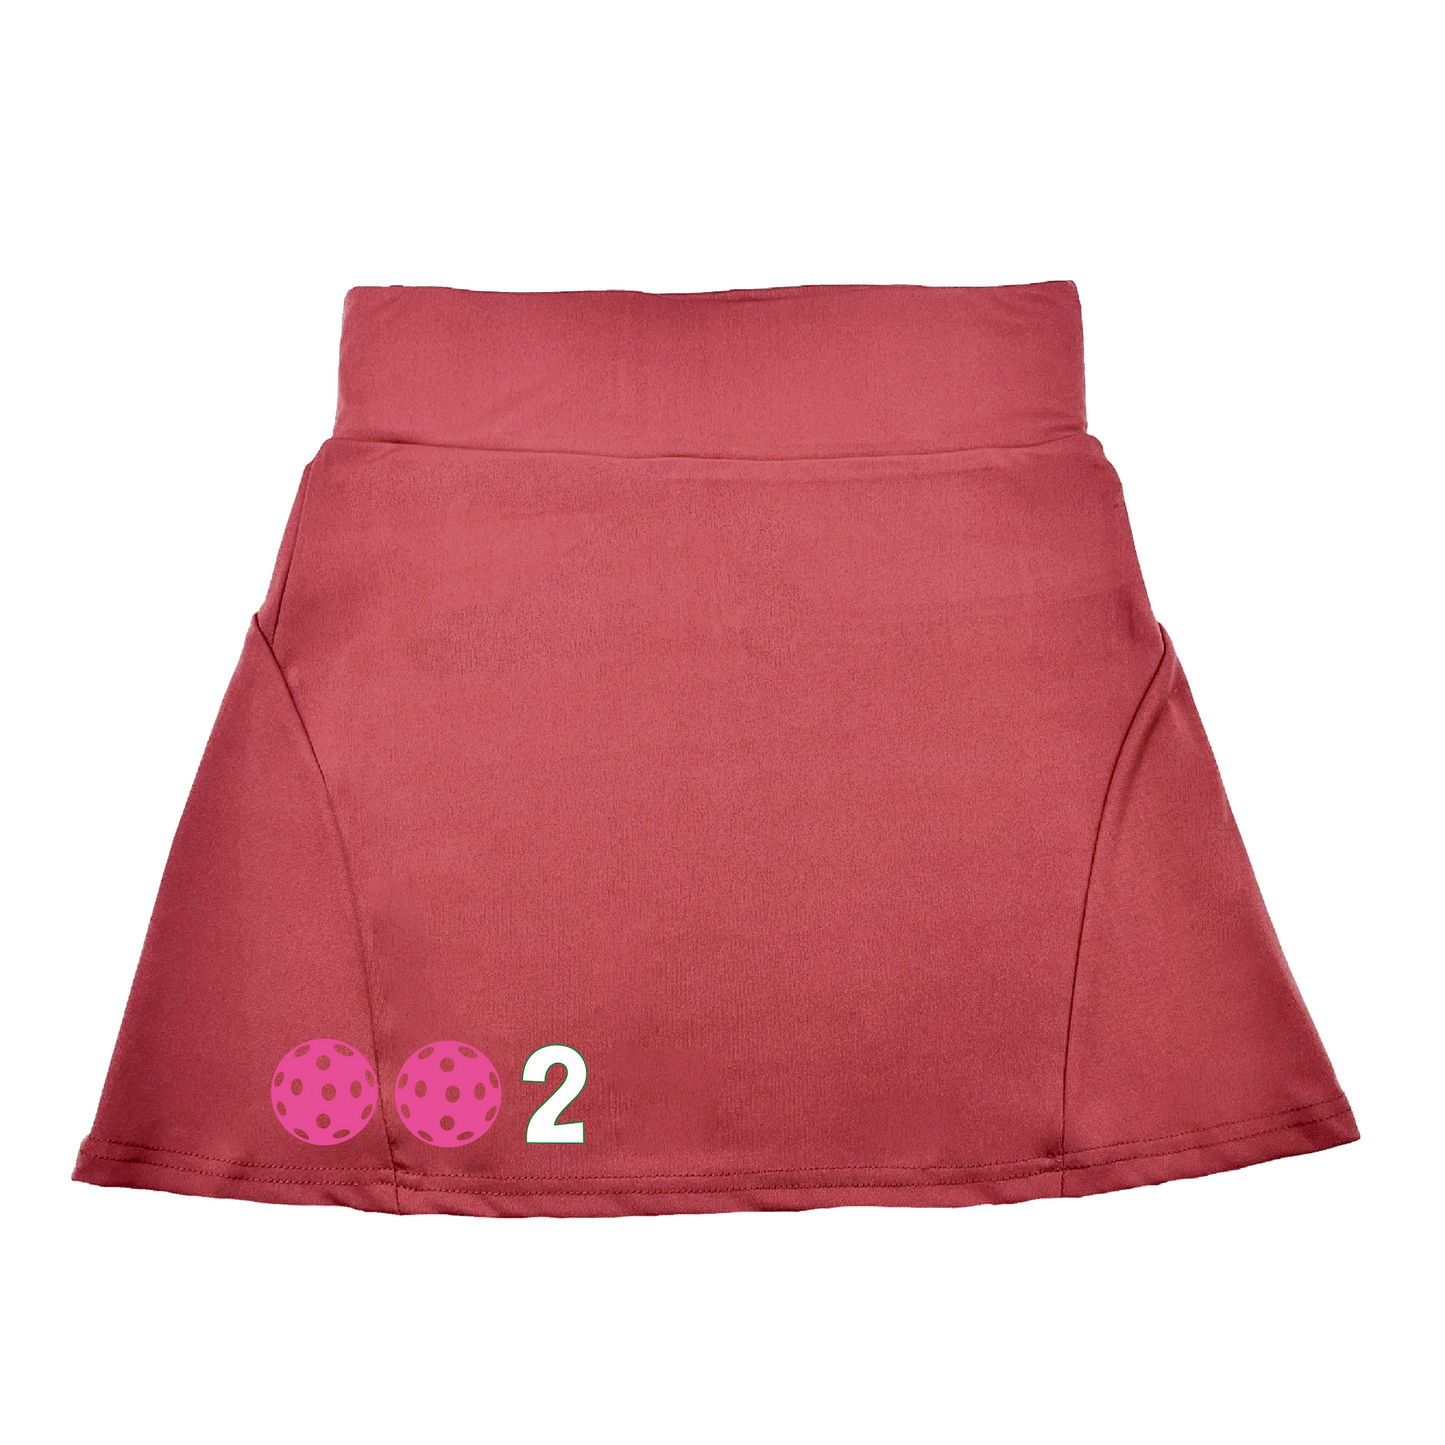 Pickleball Flirty Skort Design: 002 Customizable Pickleball Ball color:  Choose: White - Green -Yellow or Pink.  These flirty skorts have a flat mid-rise waistband with a 3 inch waistband.  Light weight without being see through and the material wicks away moisture quickly.  Flirty pleats in the back with inner shorts for free movement and stylish coverage on the courts.  A functional zipper pocket on the back and two built in pockets on the shorts for convenient storage. 